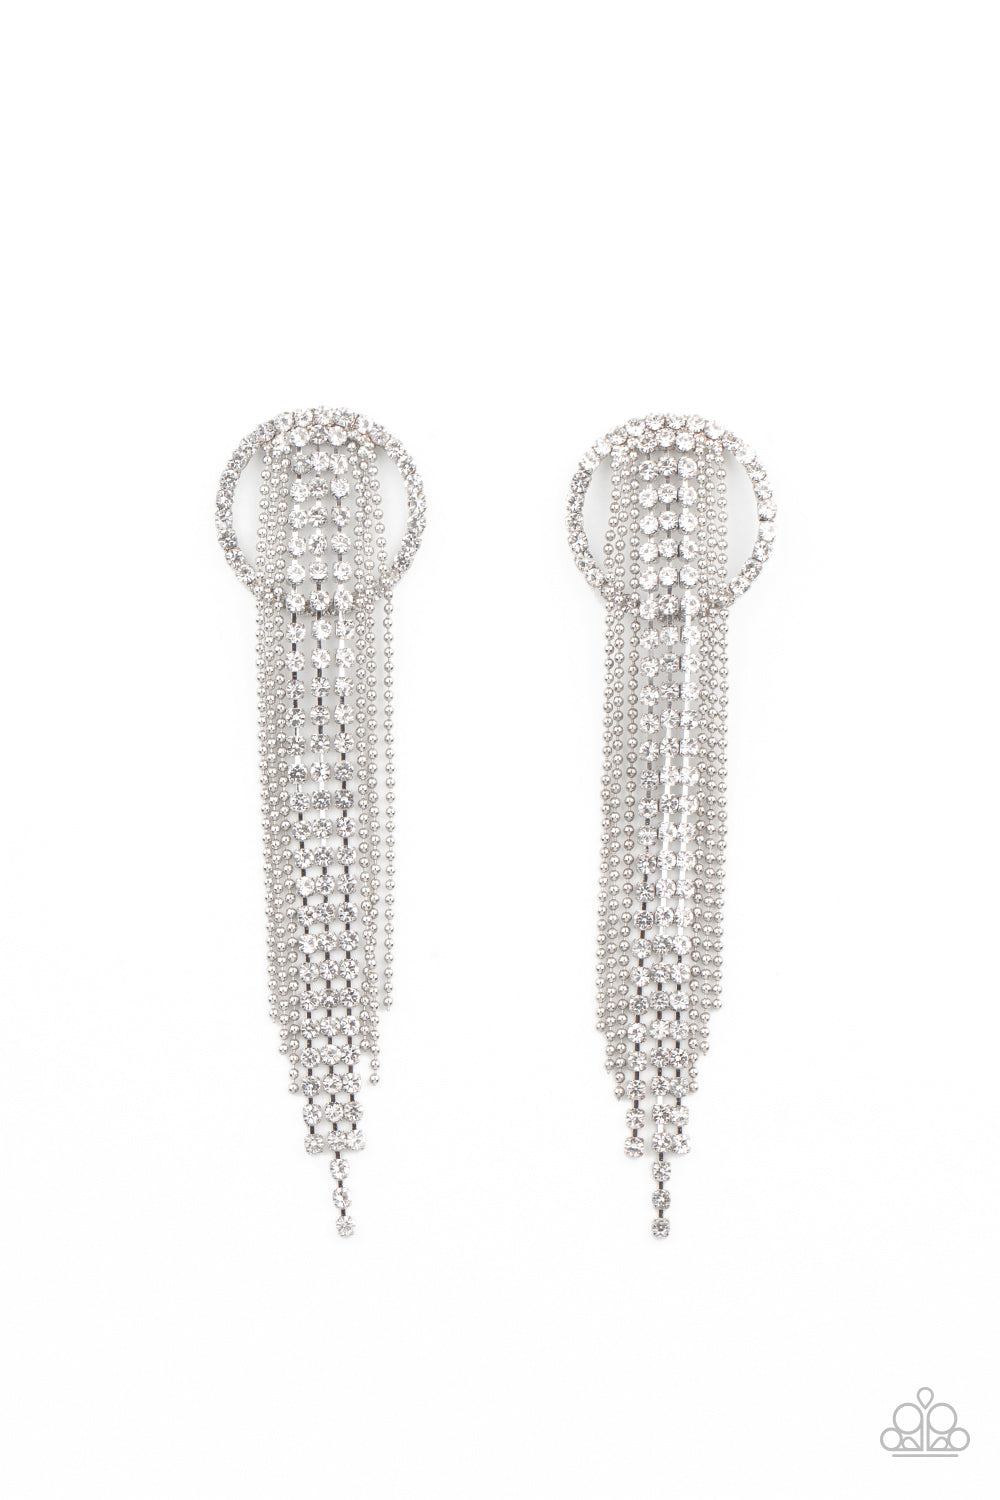 Paparazzi Dazzle By Default White Post Earrings - Life of the Party Exclusive January 2021